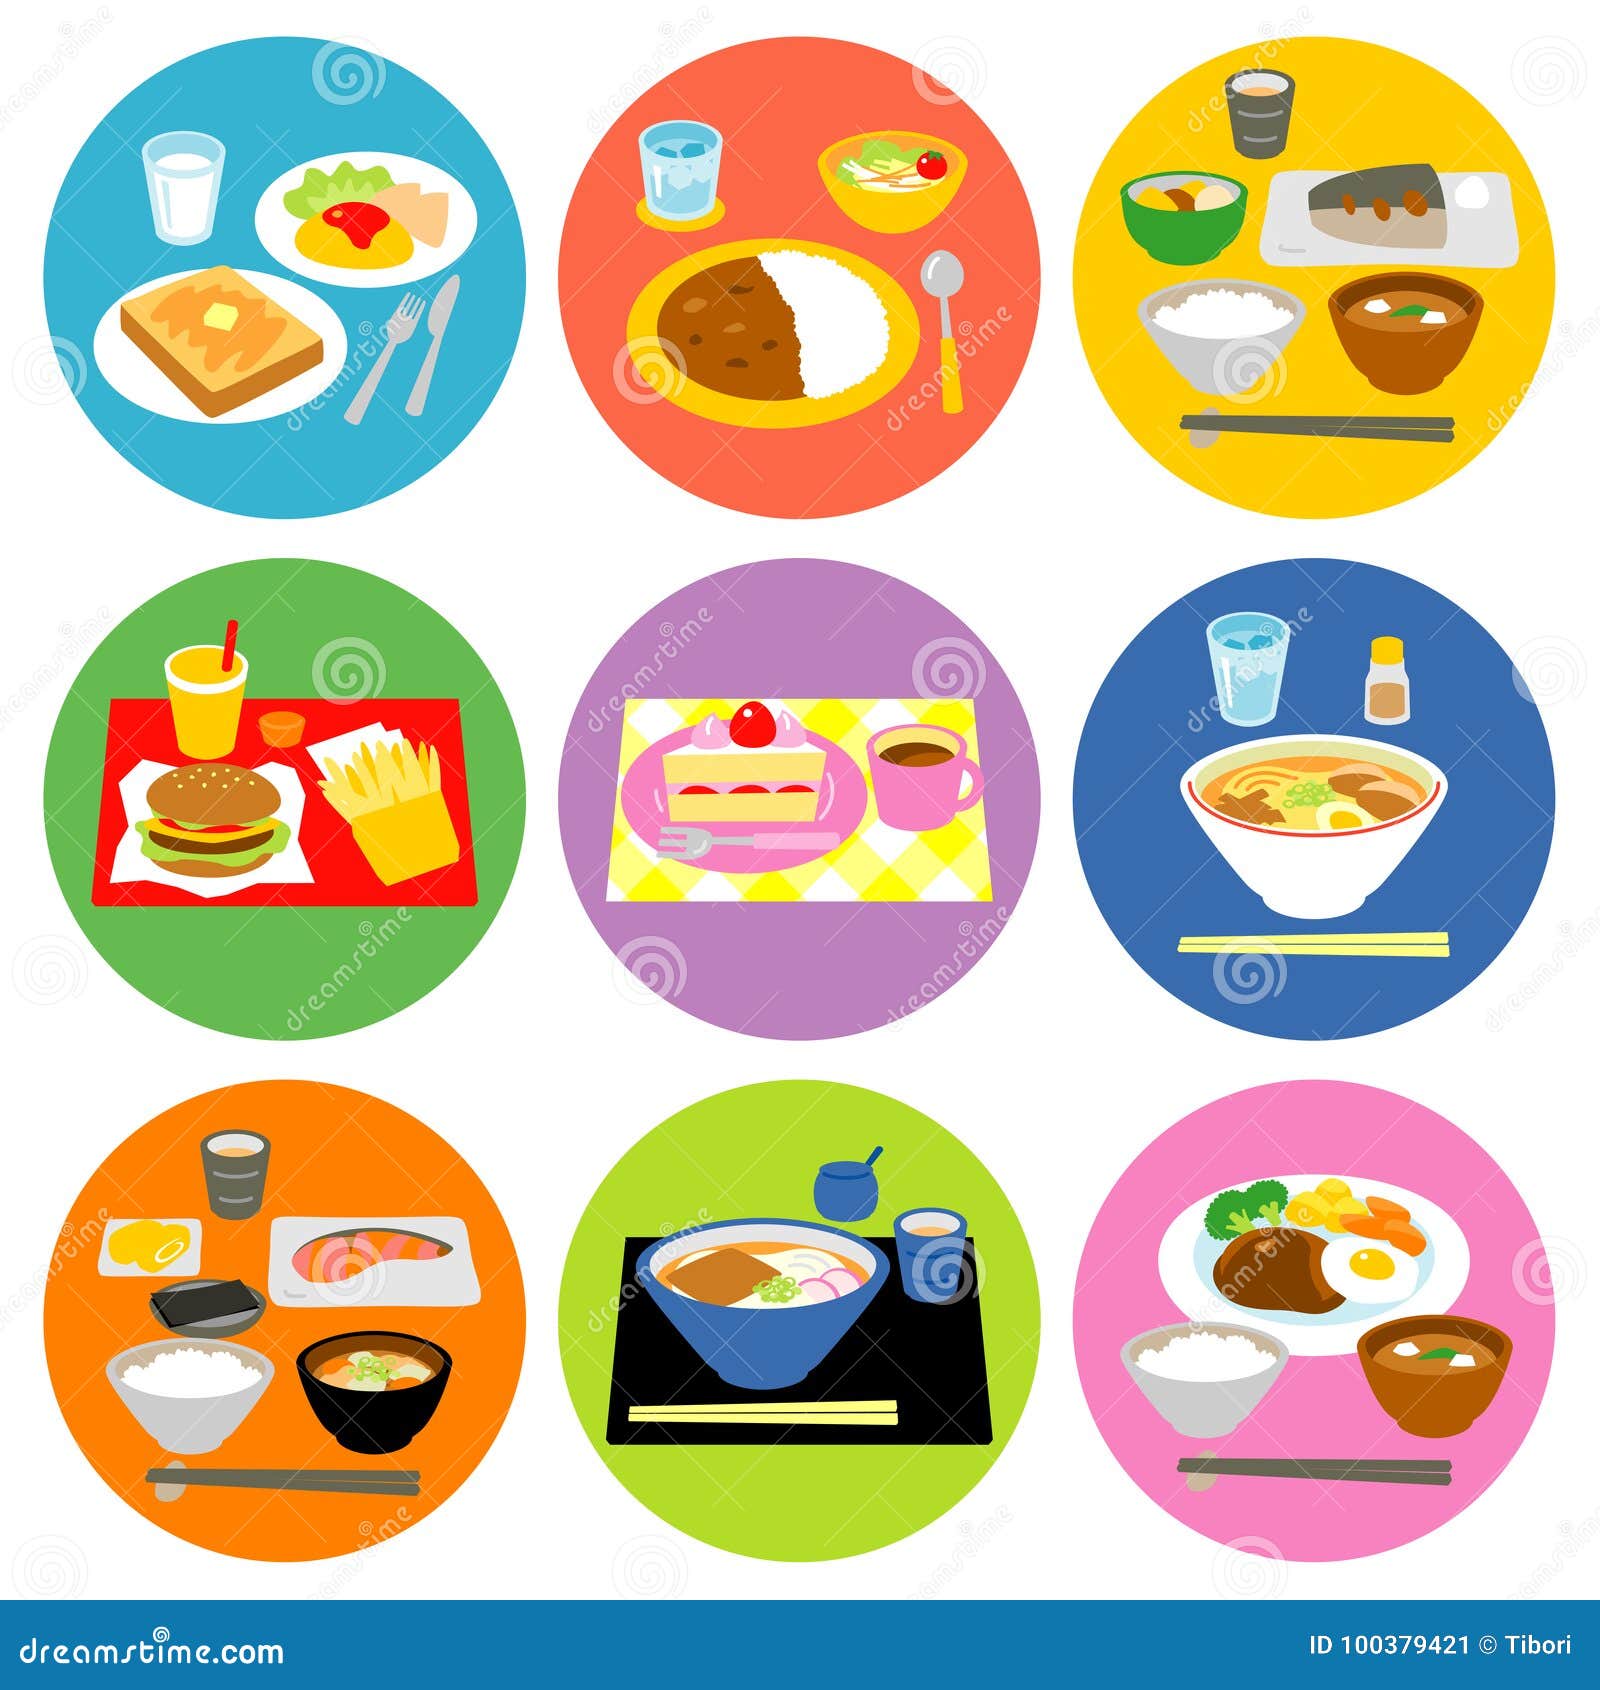 Typical meals in Japan 02 stock vector. Illustration of cuisine - 100379421